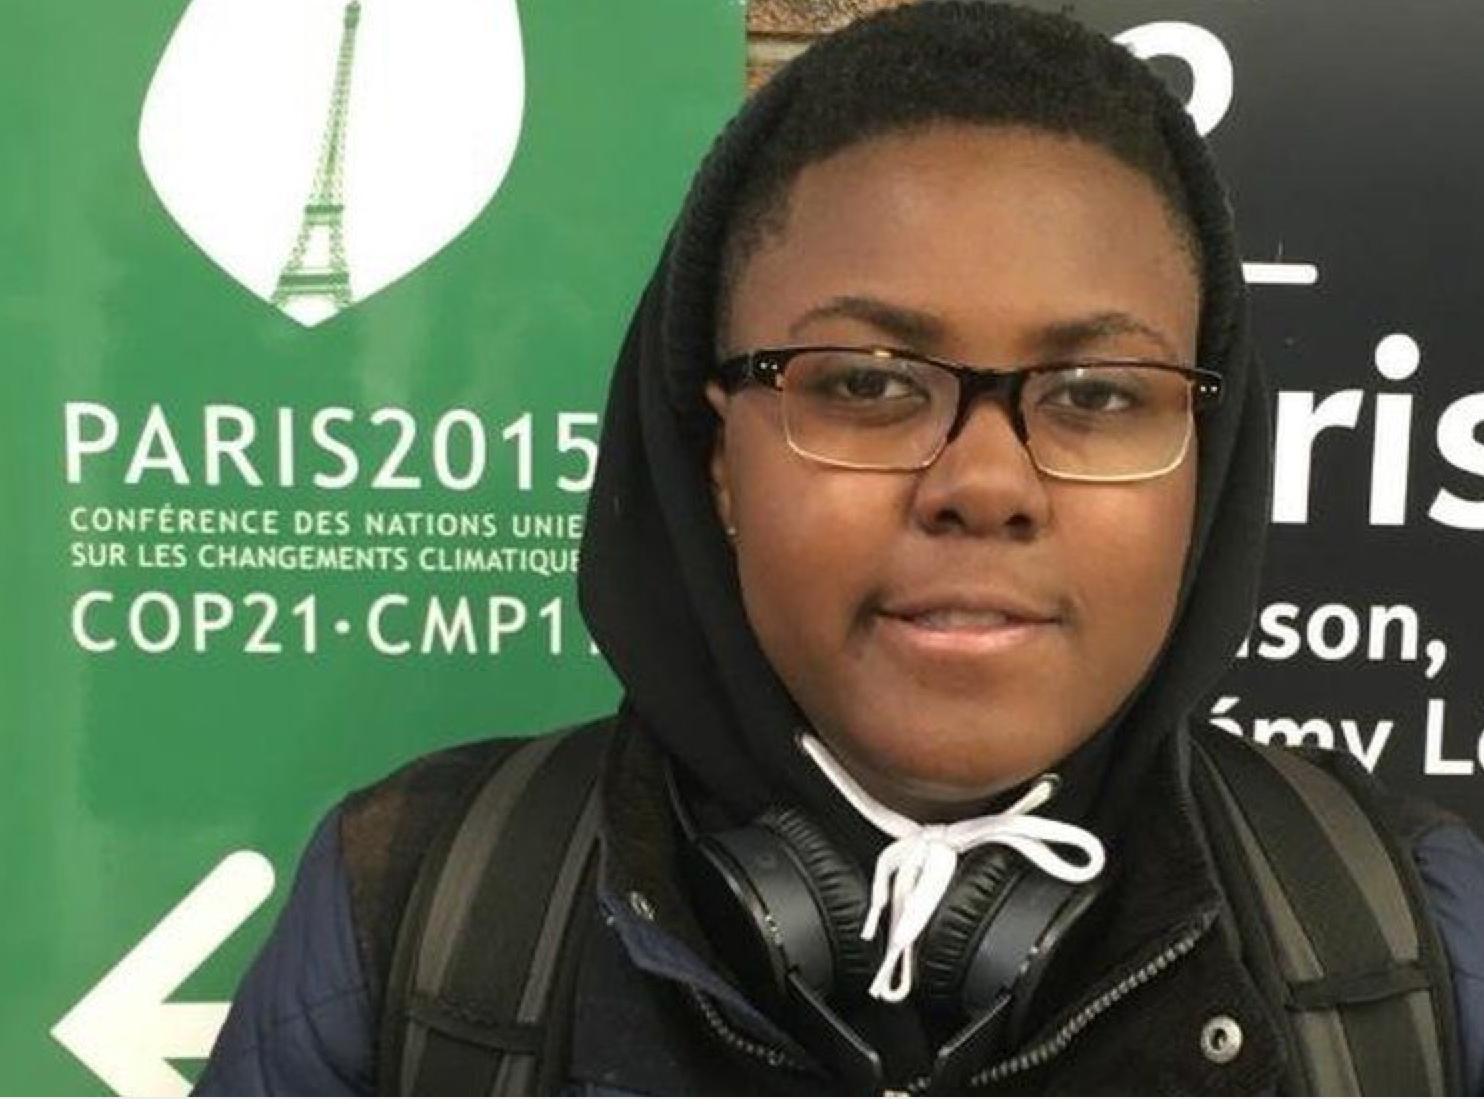 COP21: Victoria Barrett, the teen suing Obama over climate change